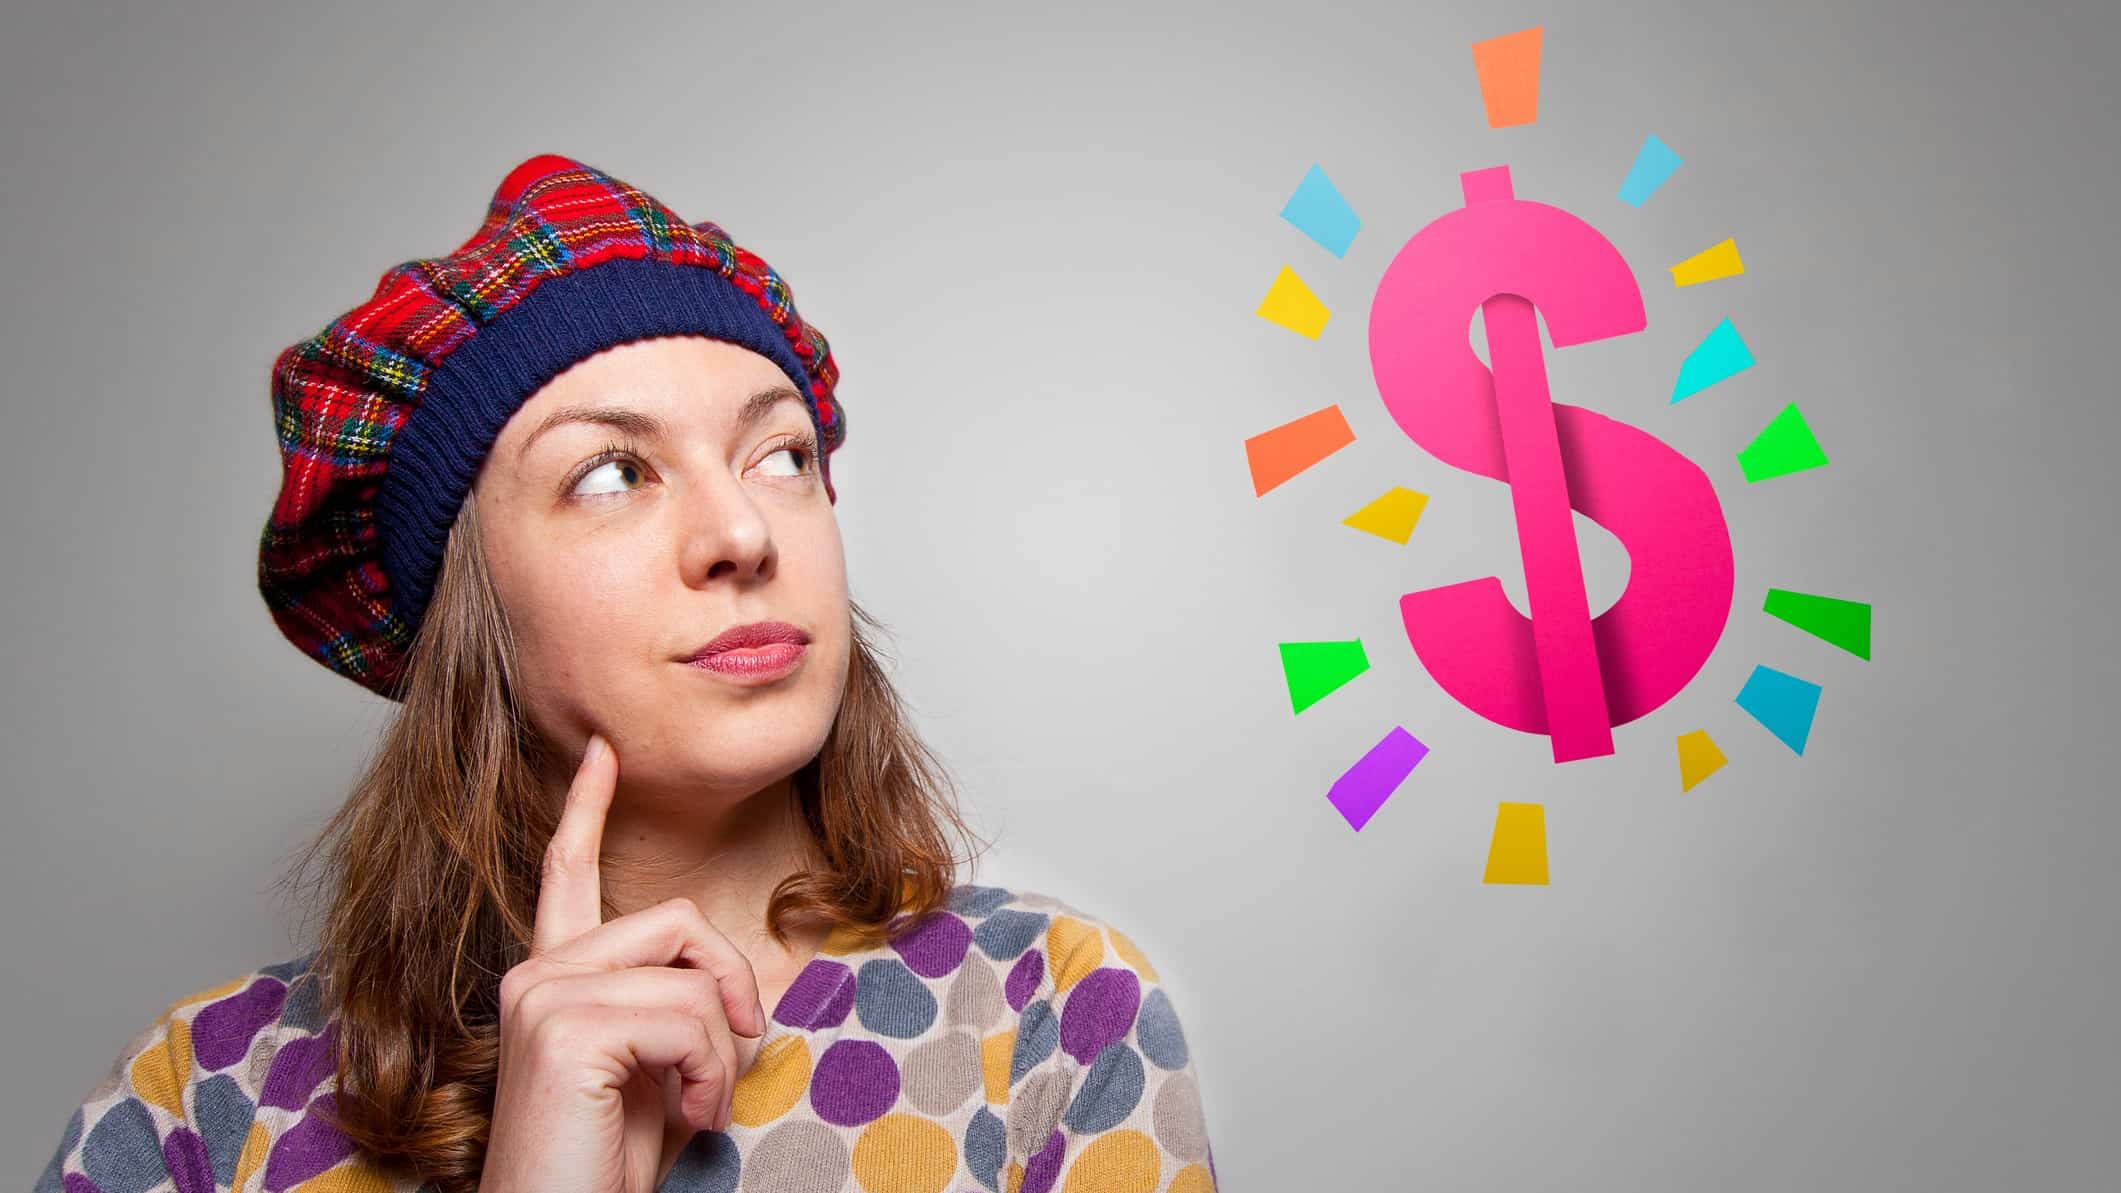 A woman looks quizzical while looking at a dollar sign in the air.